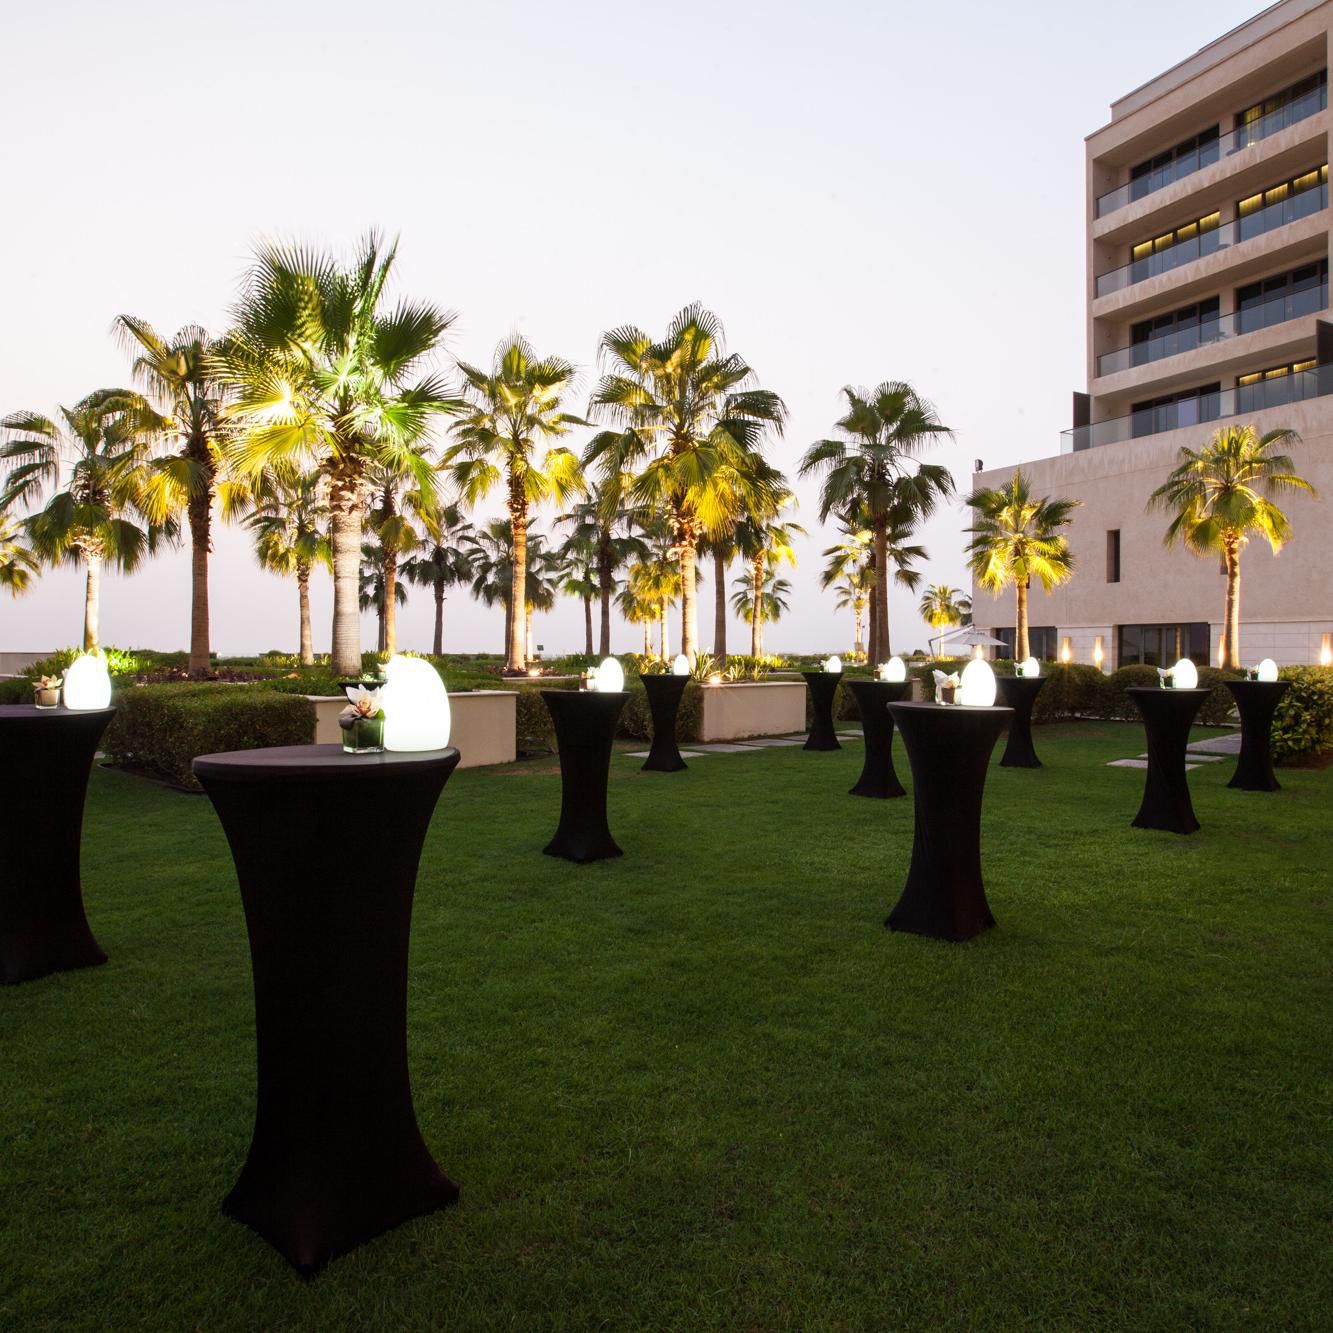 Have evening events at our outdoor terrace with cocktail setup